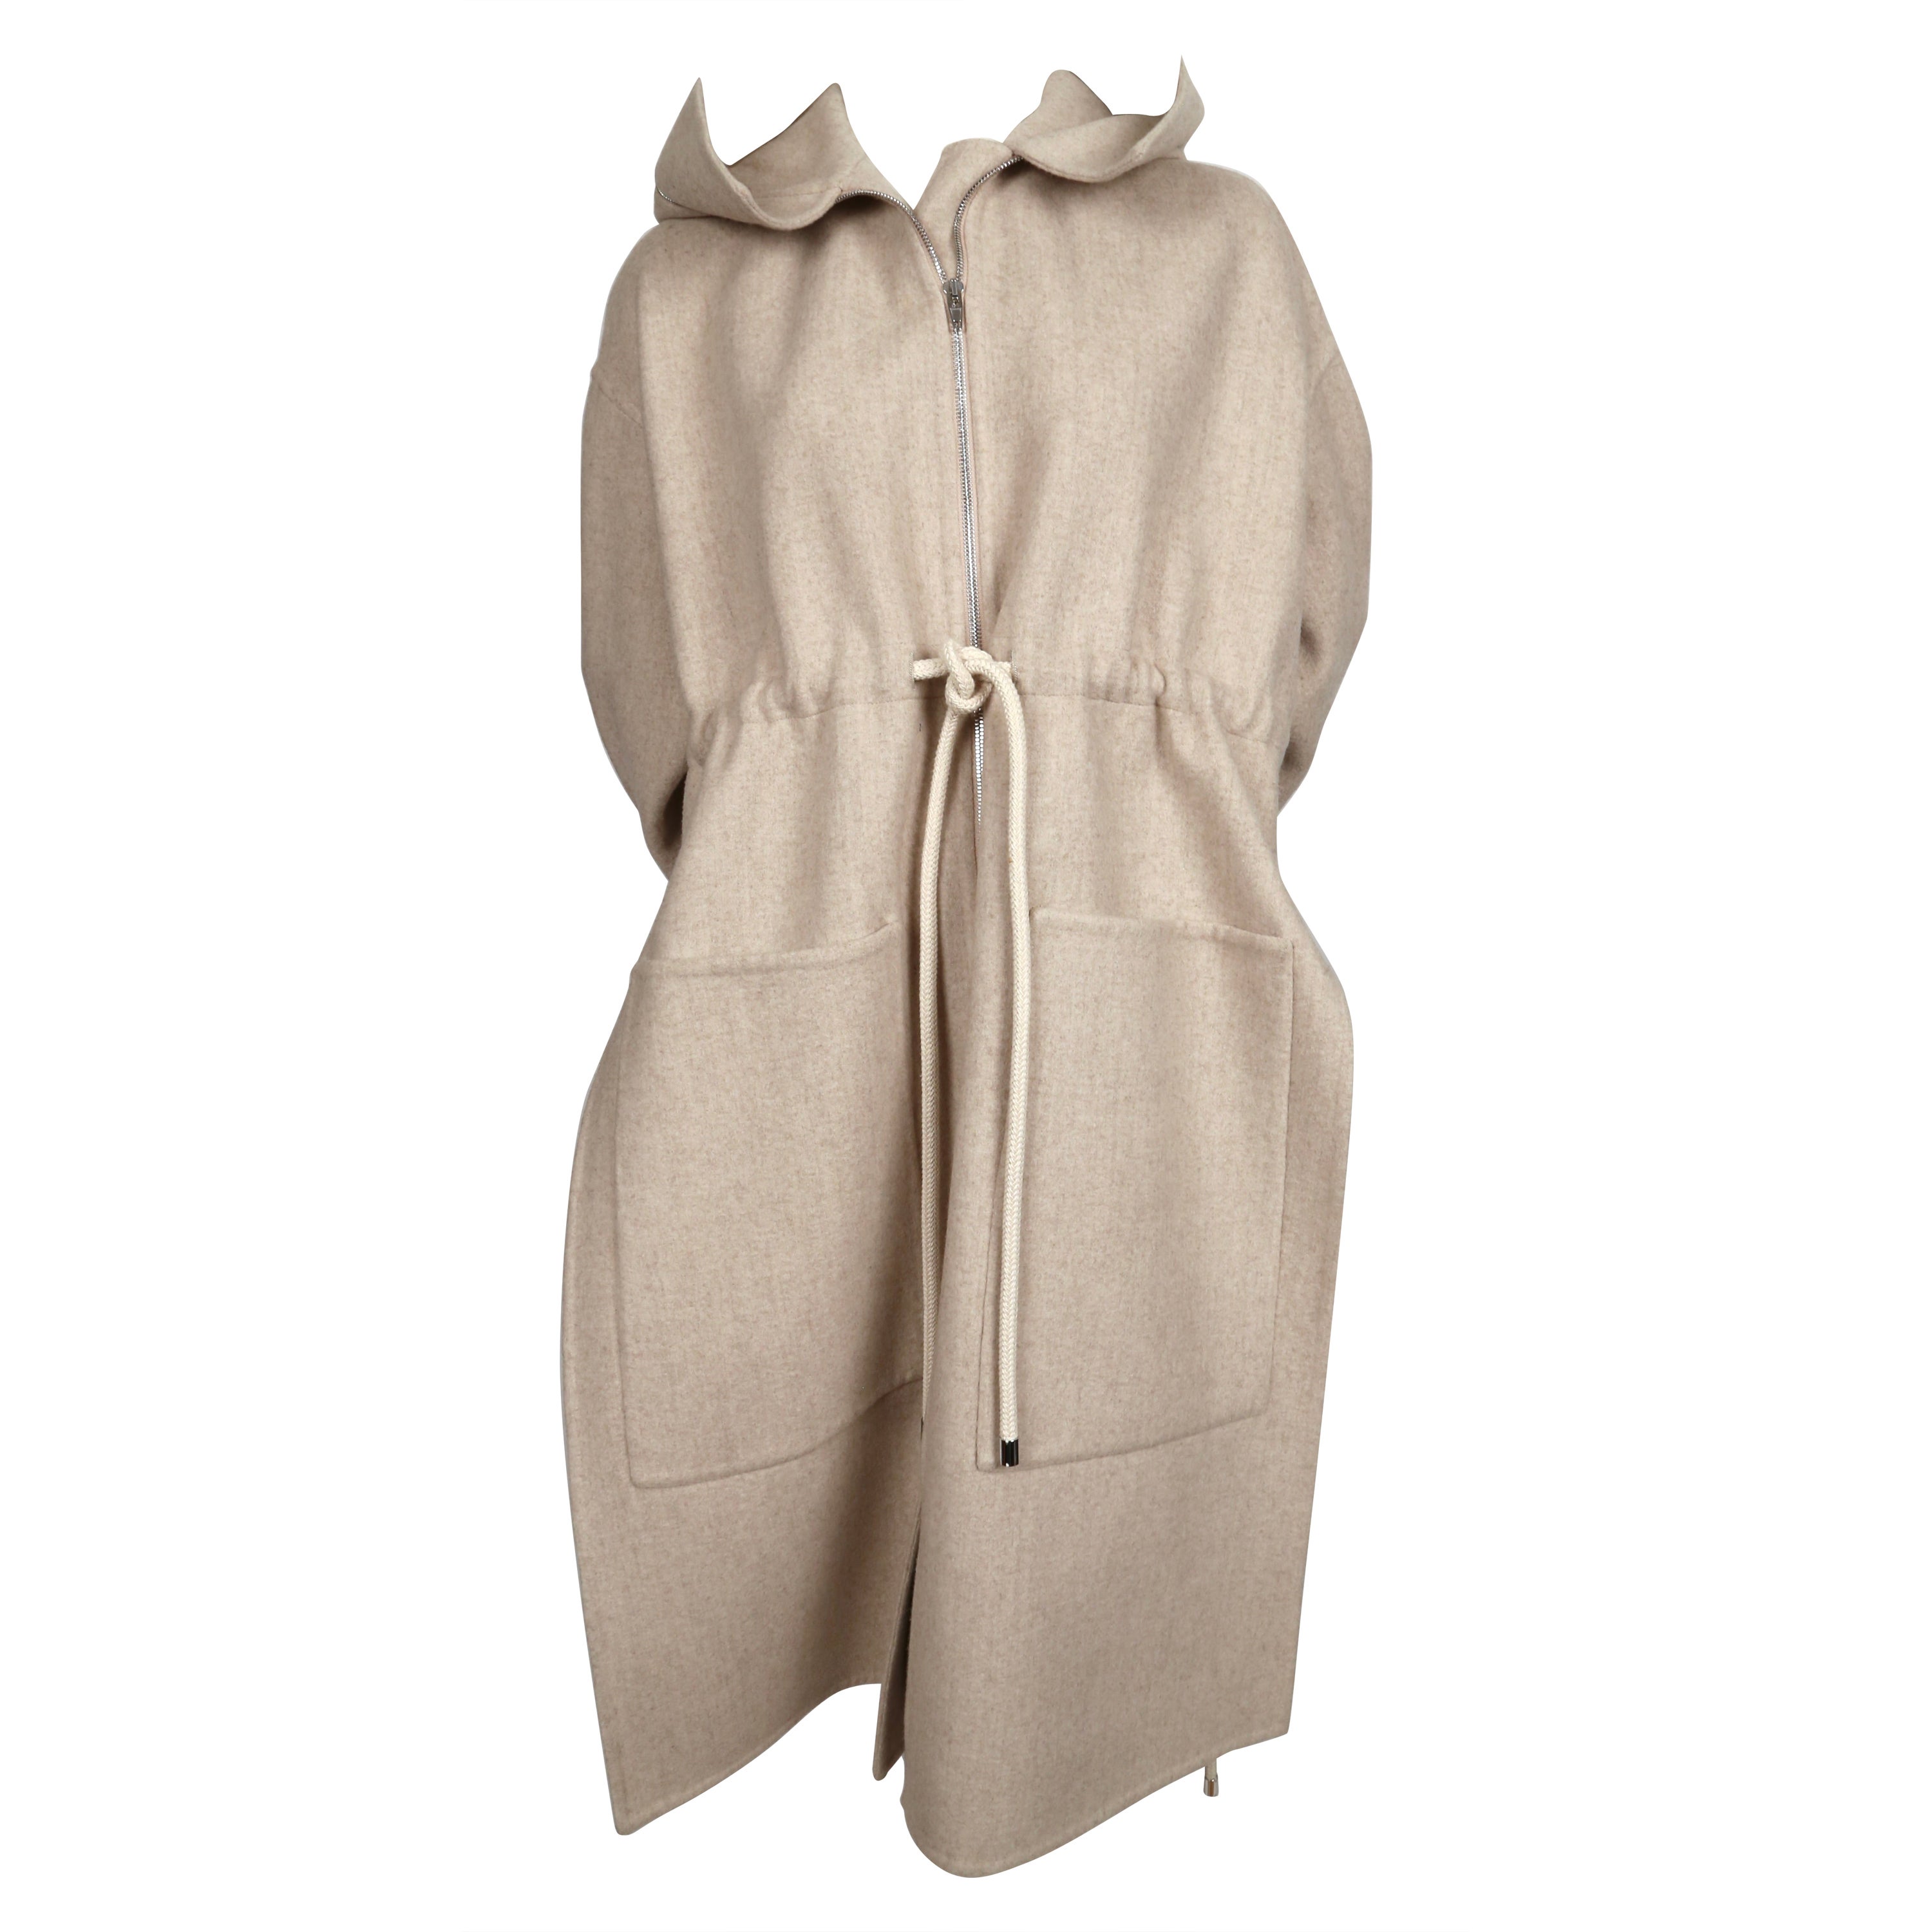 CELINE by PHOEBE PHILO oatmeal wool and cashmere coat with hood - resort 2016 For Sale